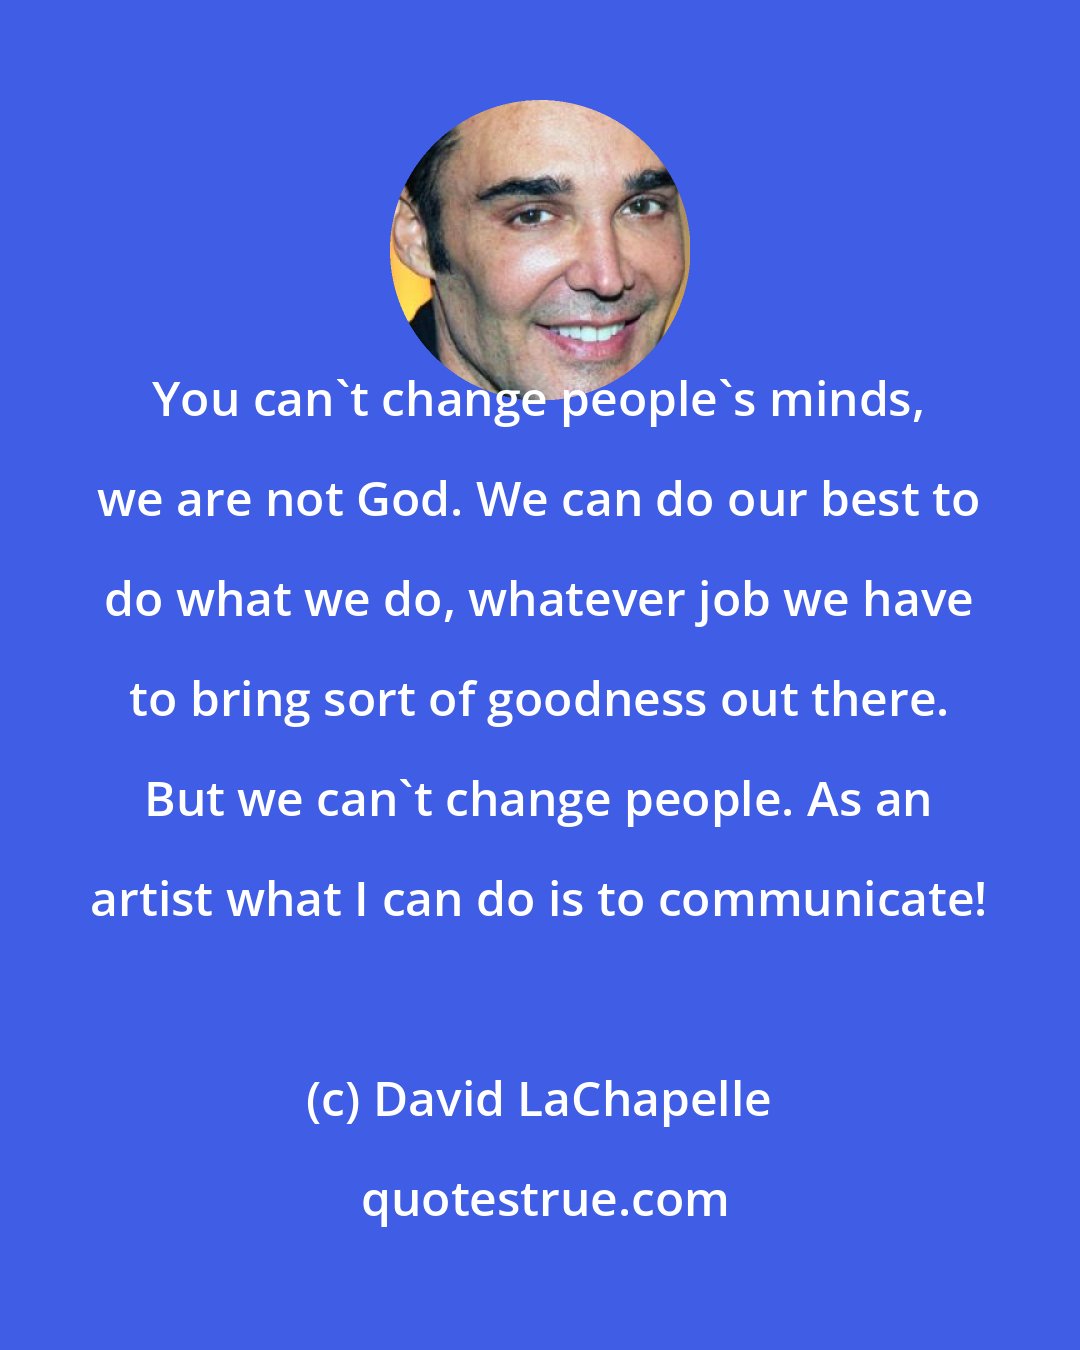 David LaChapelle: You can't change people's minds, we are not God. We can do our best to do what we do, whatever job we have to bring sort of goodness out there. But we can't change people. As an artist what I can do is to communicate!